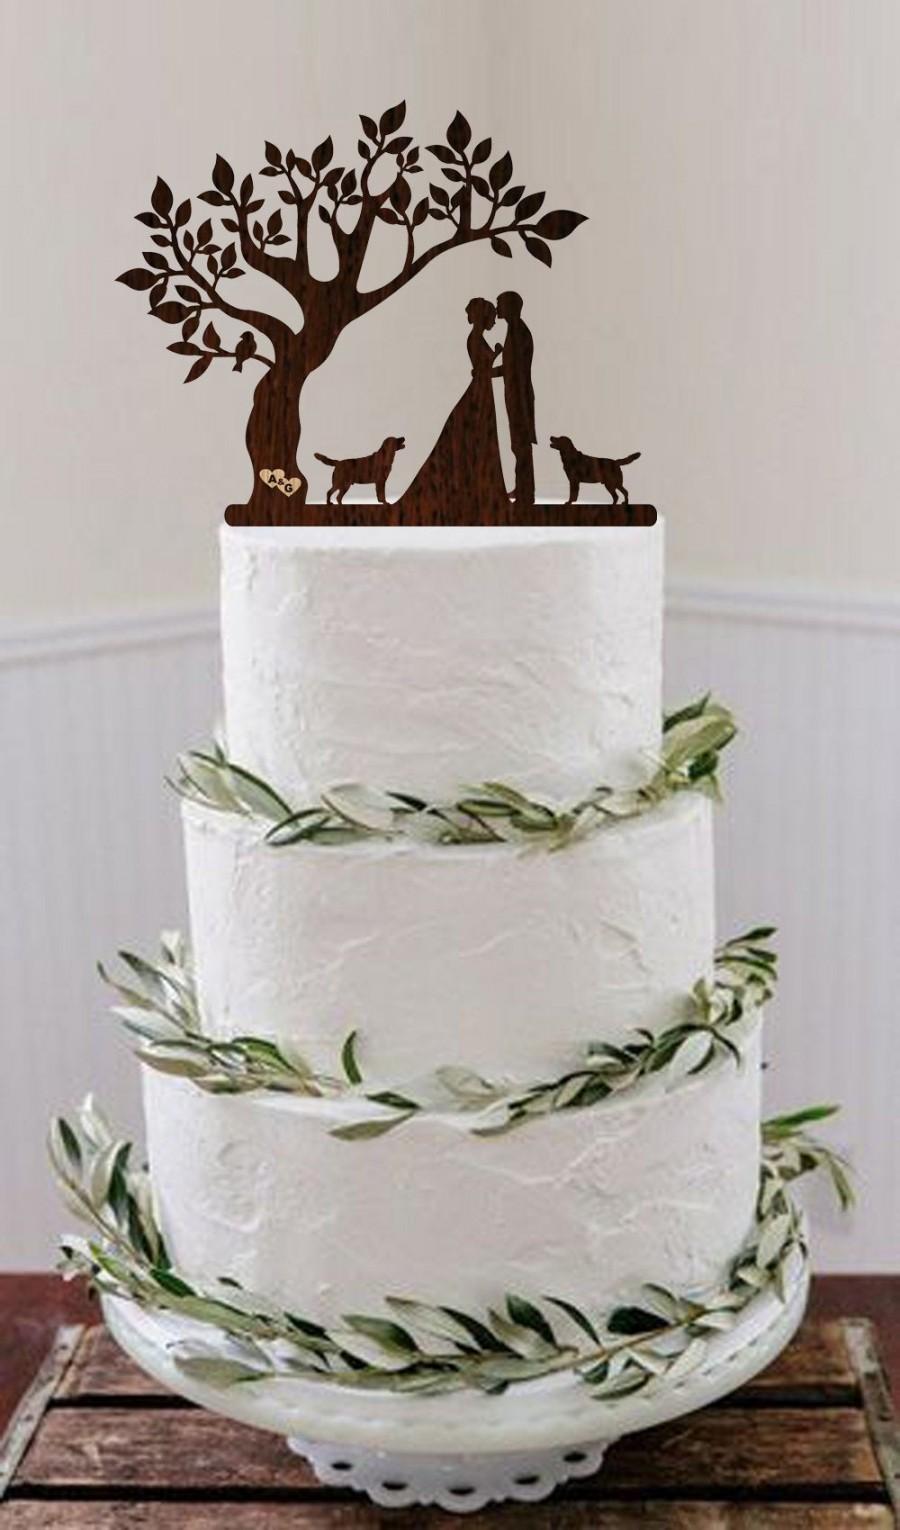 Tree cake topper,bride and groom cake topper,Tree wedding cake topper,Mr and mrs cake topper,initial cake topper,heart cake topper,172